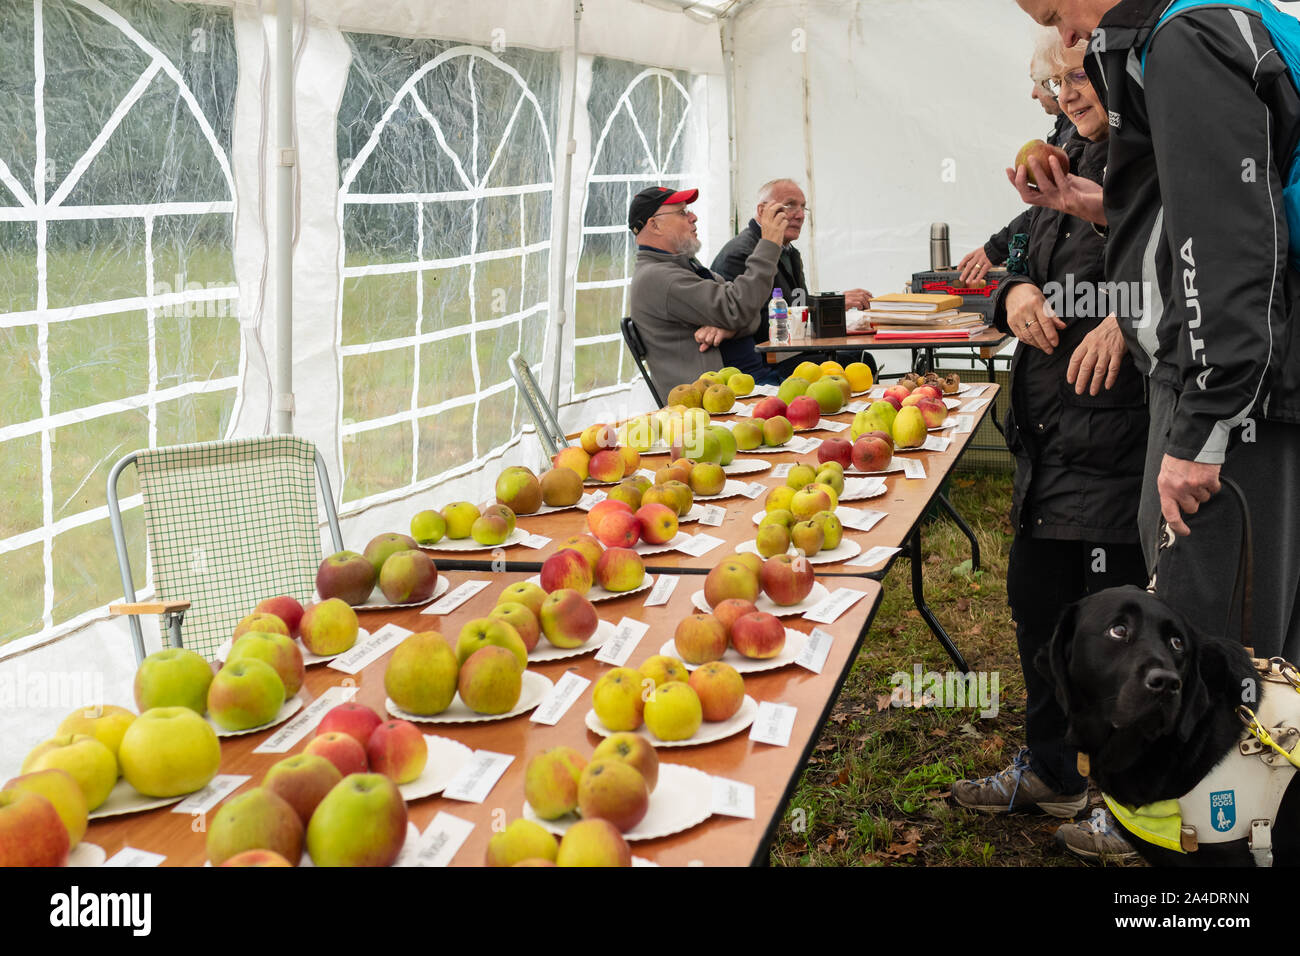 Display of apple varieties at Blackmoor Apple Tasting Day during October in the Hampshire village, UK Stock Photo